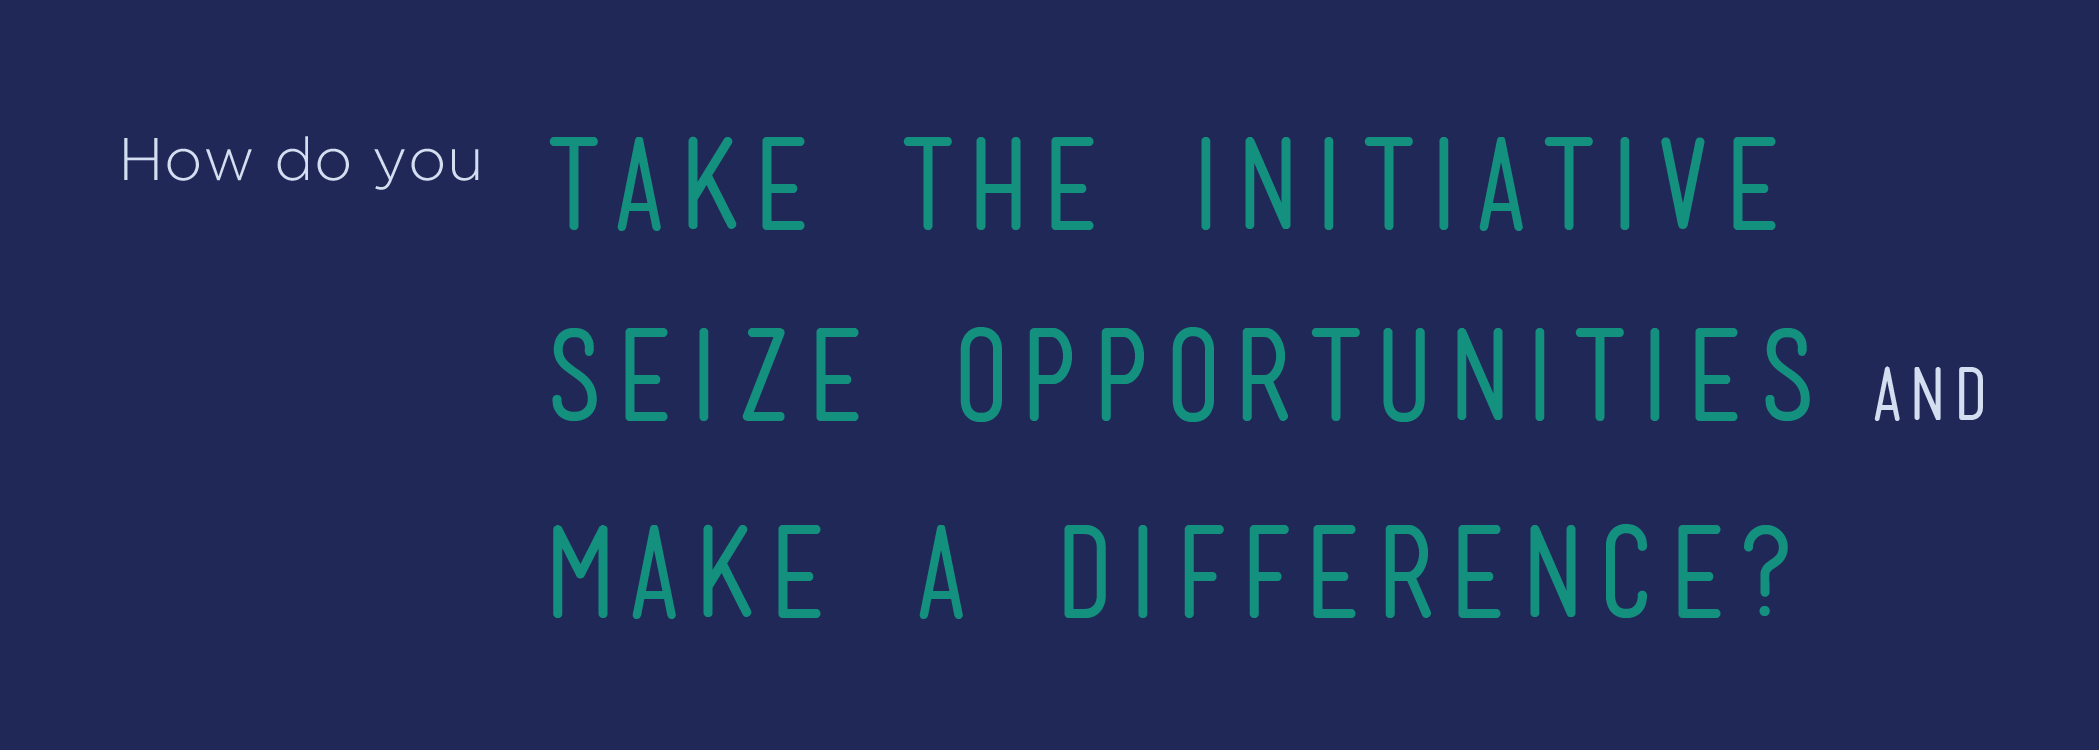 How do you take the initiative, seize opportunities and make a difference?